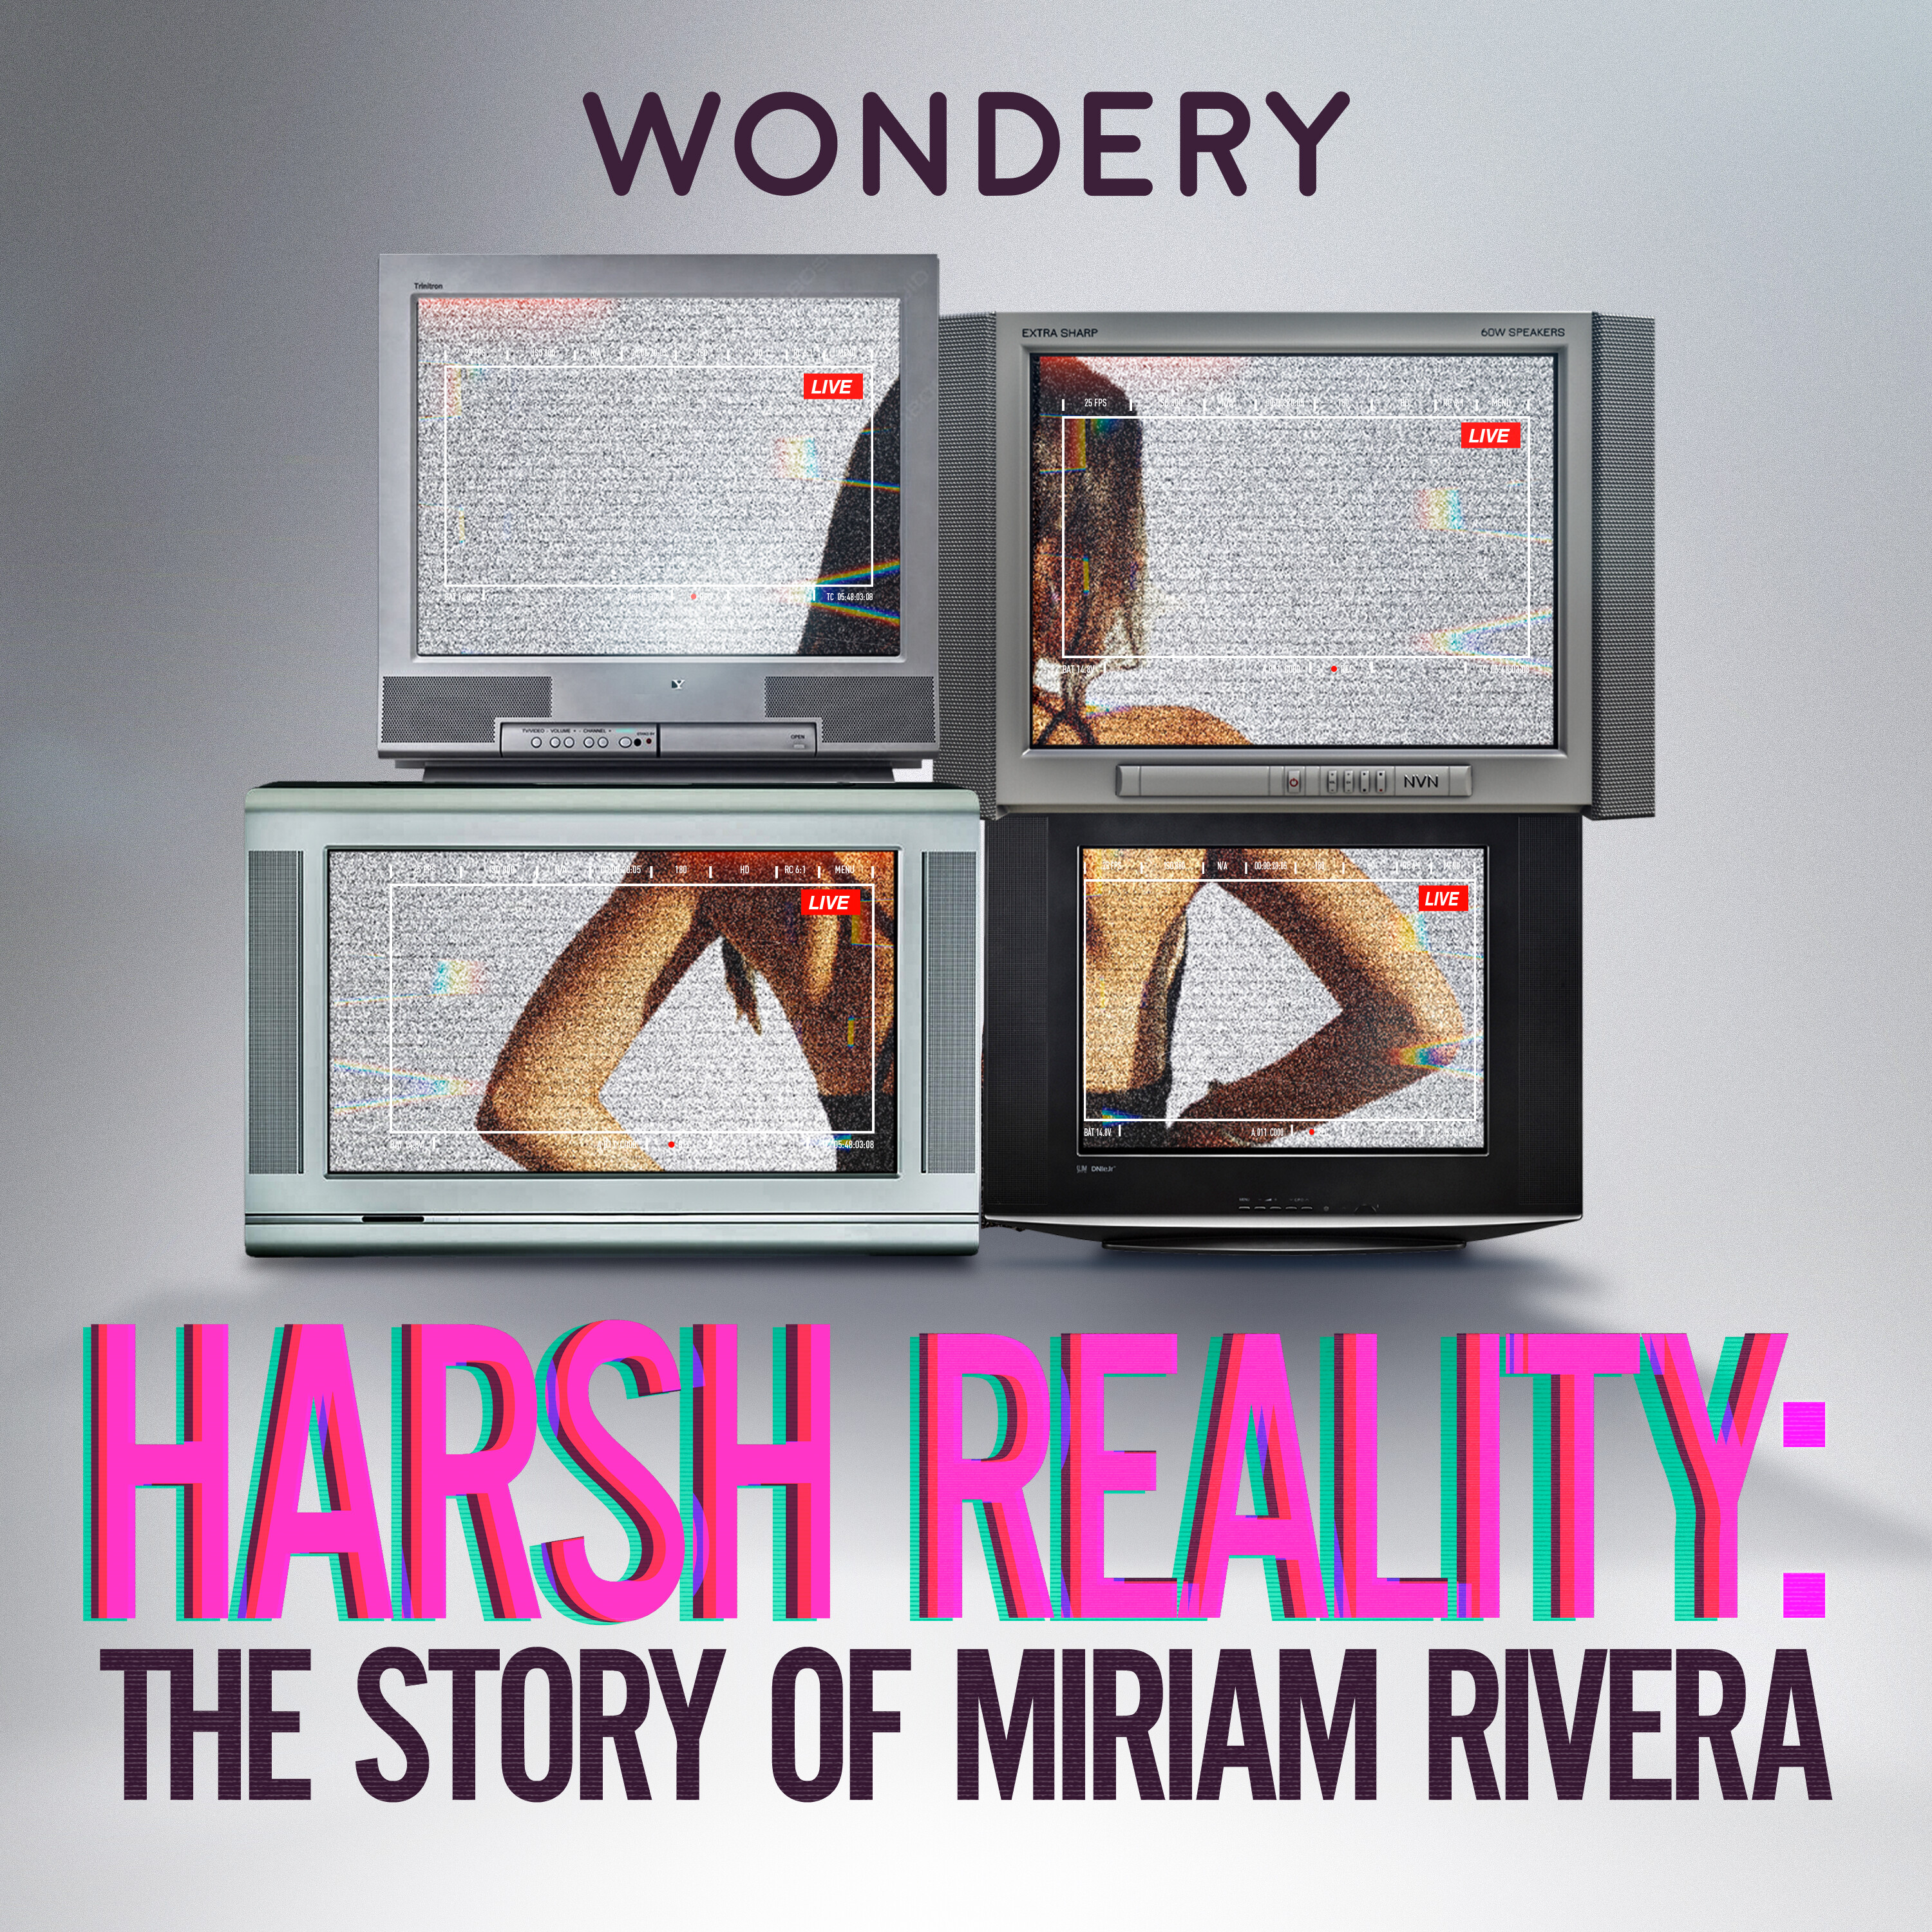 ‘Harsh Reality:’ There’s Something About Miriam